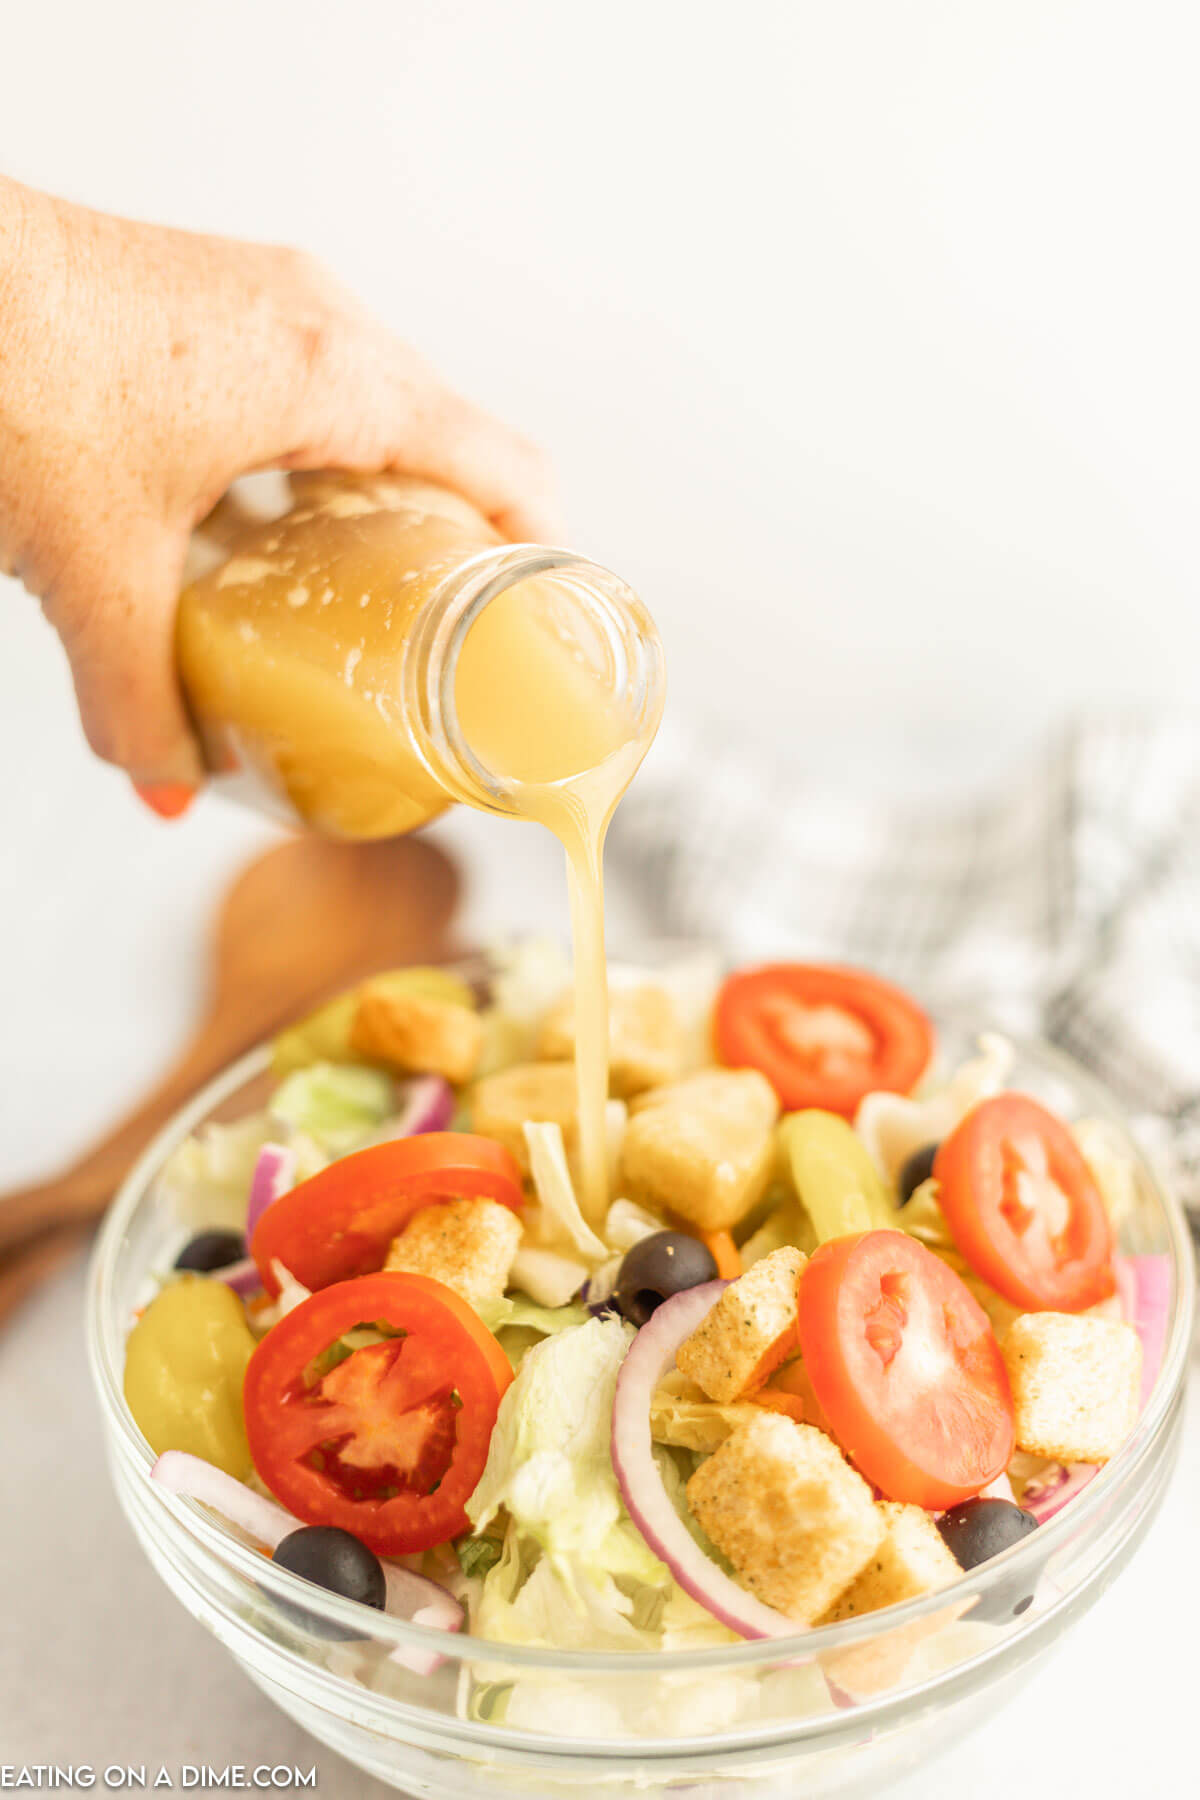 Pouring salad dressing over a bowl of salad. 